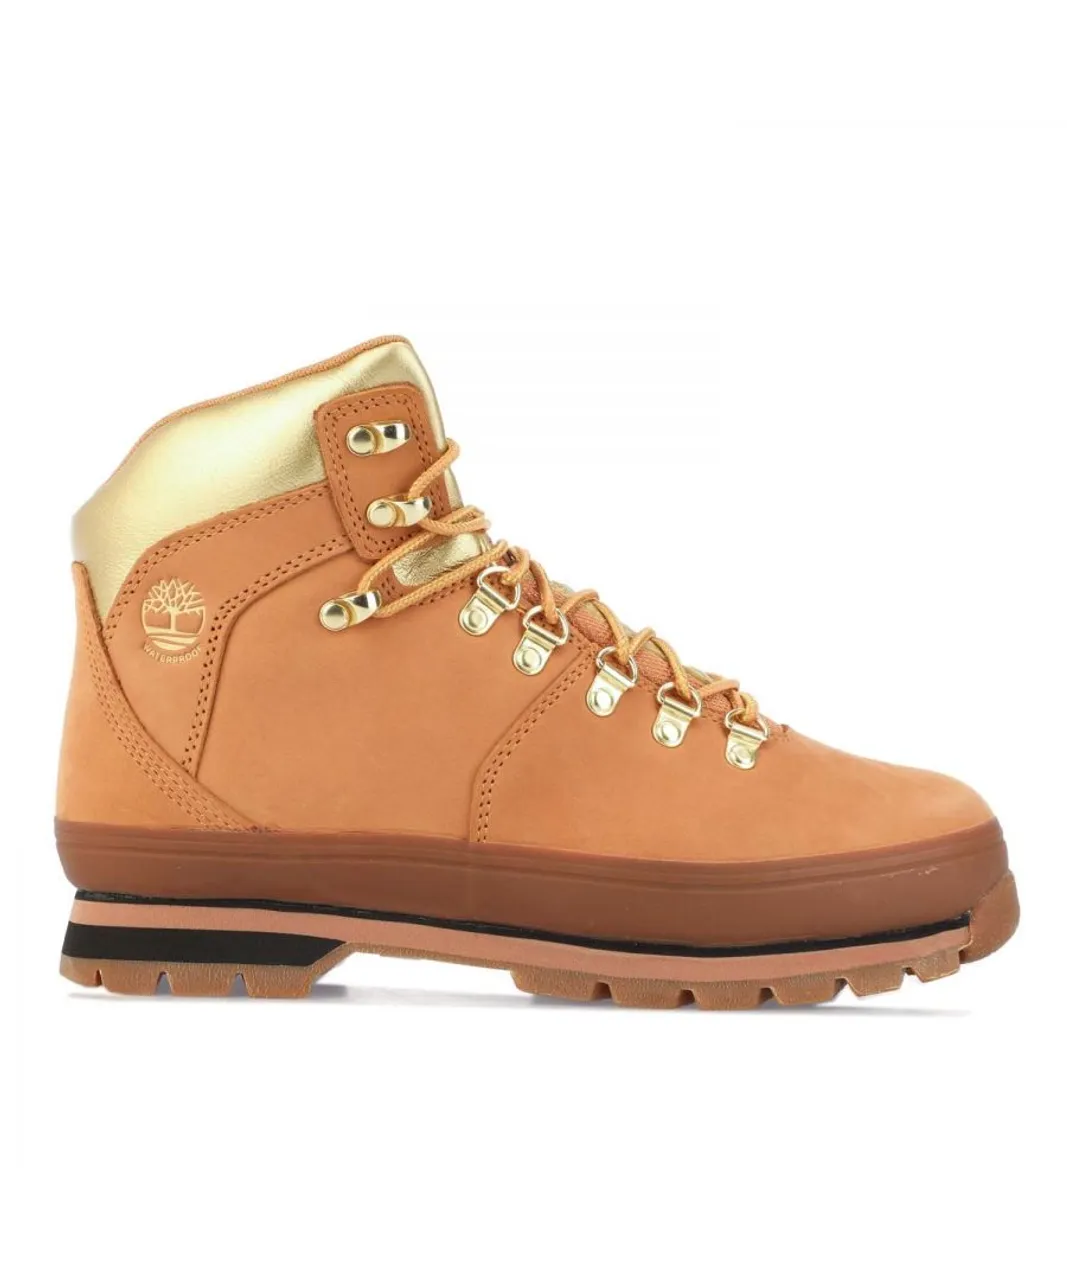 Timberland Womenss Euro Hiker Hiking Boots in Wheat - Natural Leather